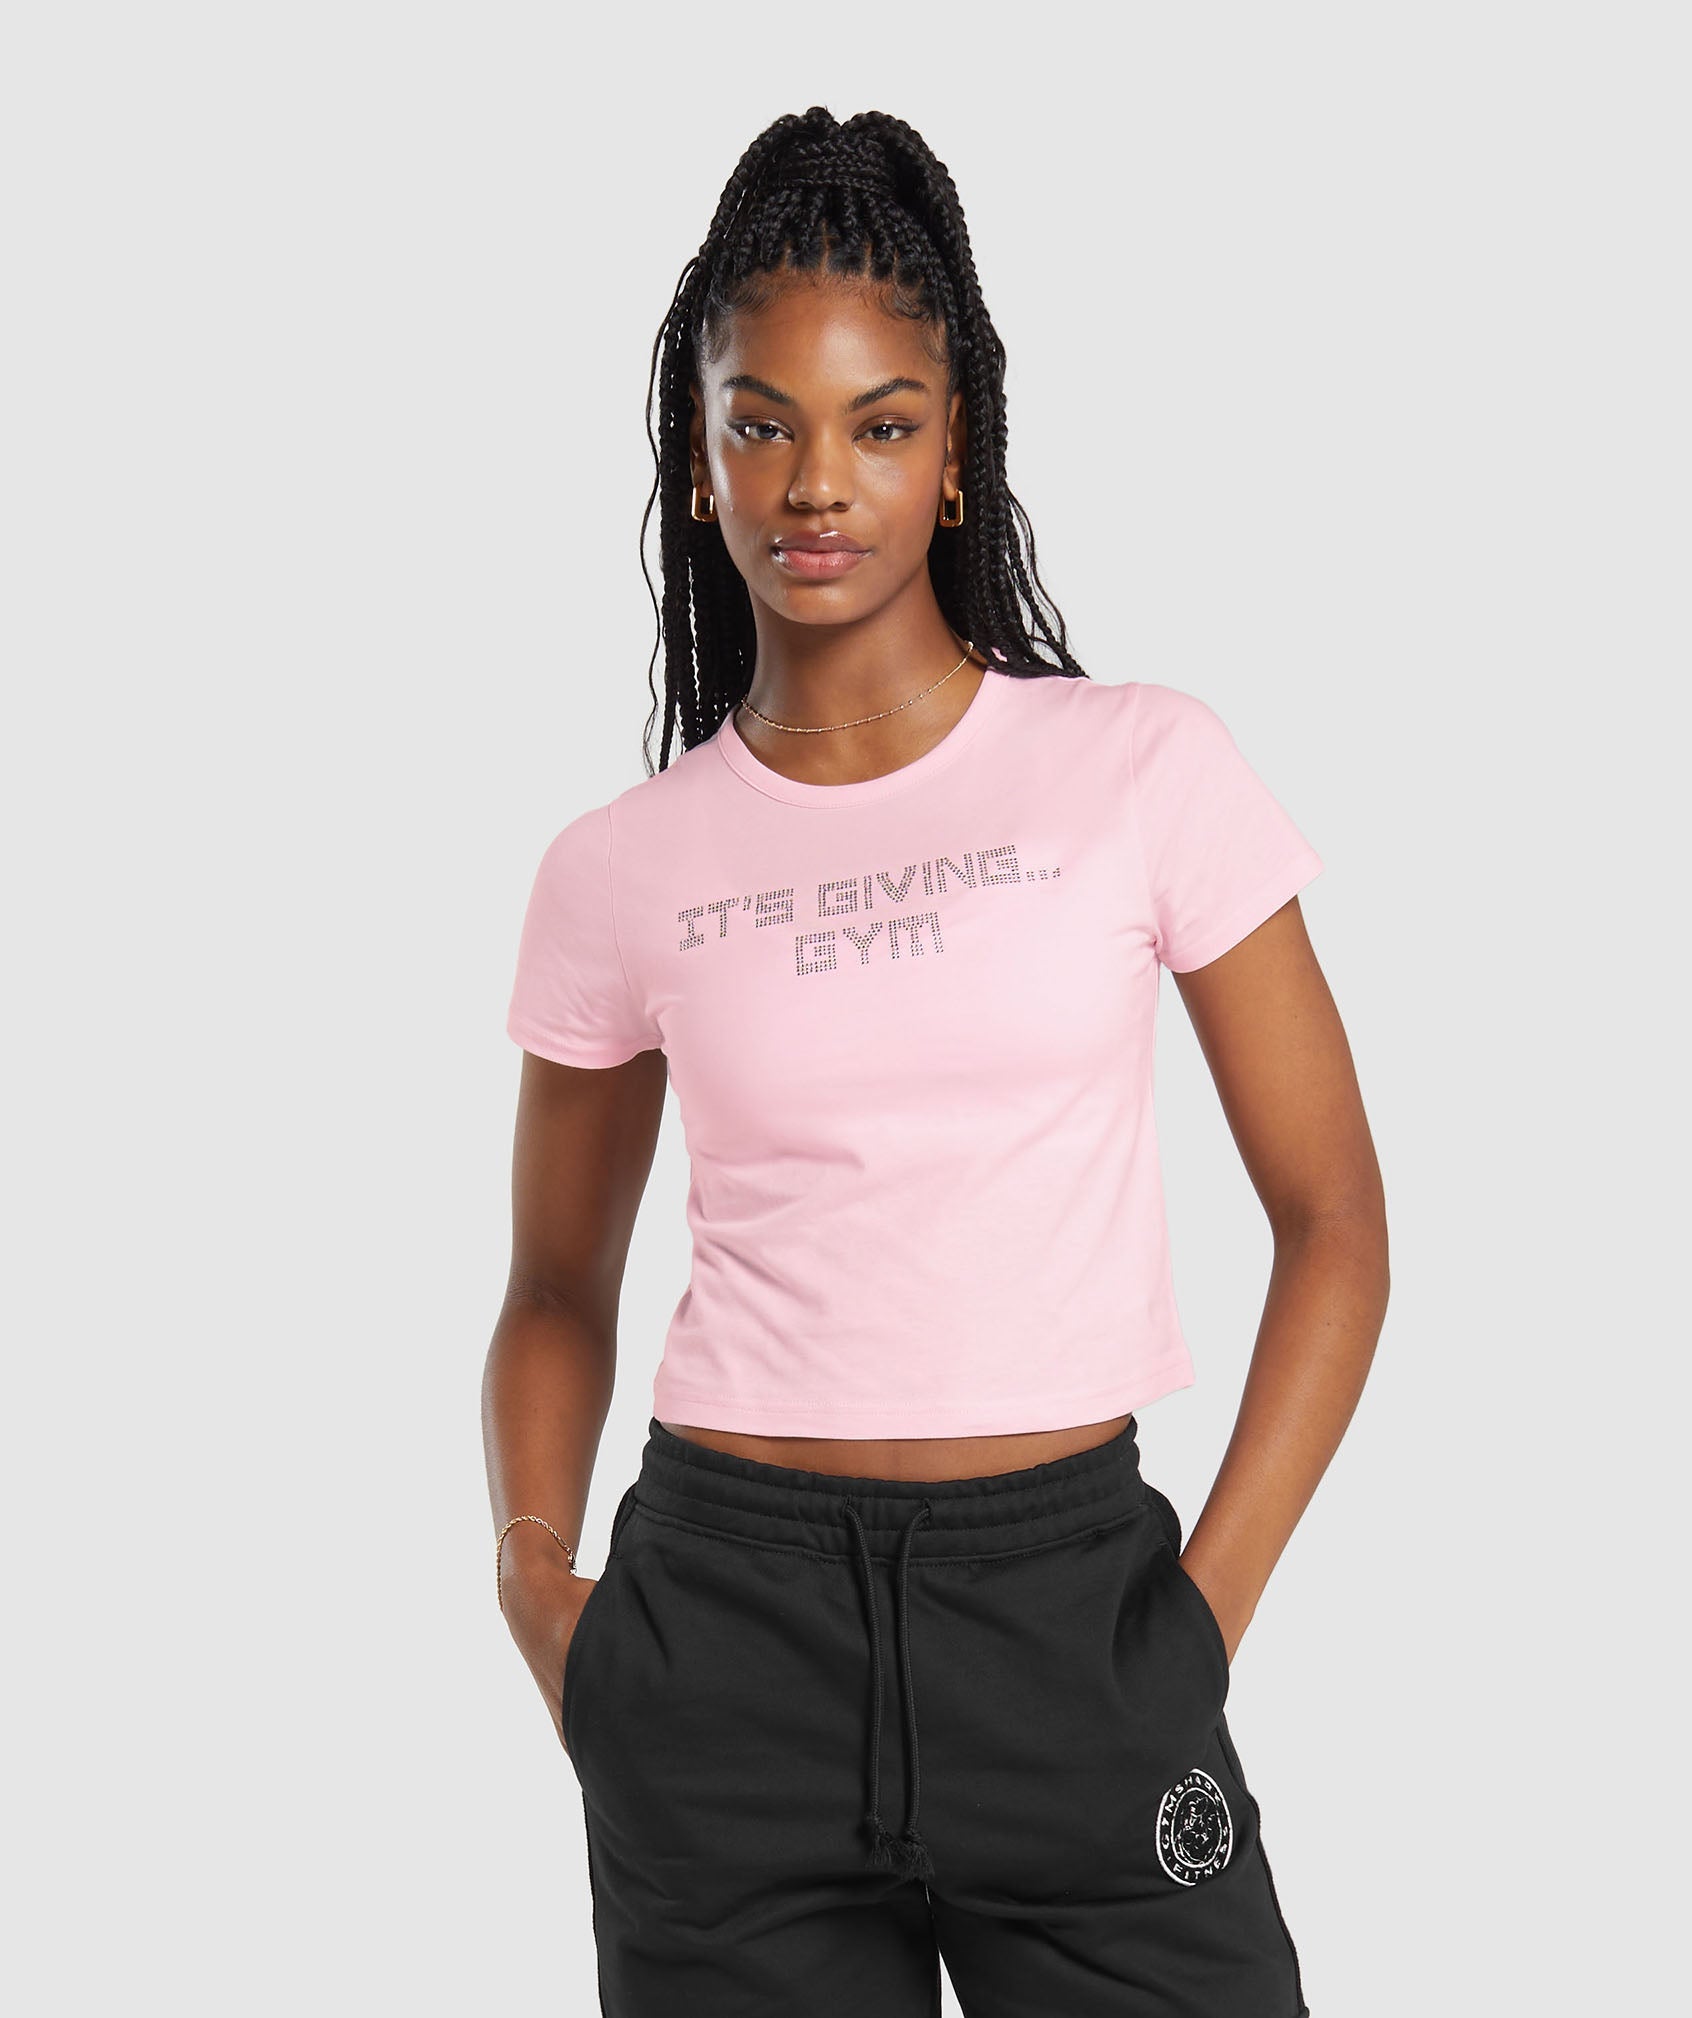 Its Giving Gym Baby T-Shirt in Dolly Pink - view 1